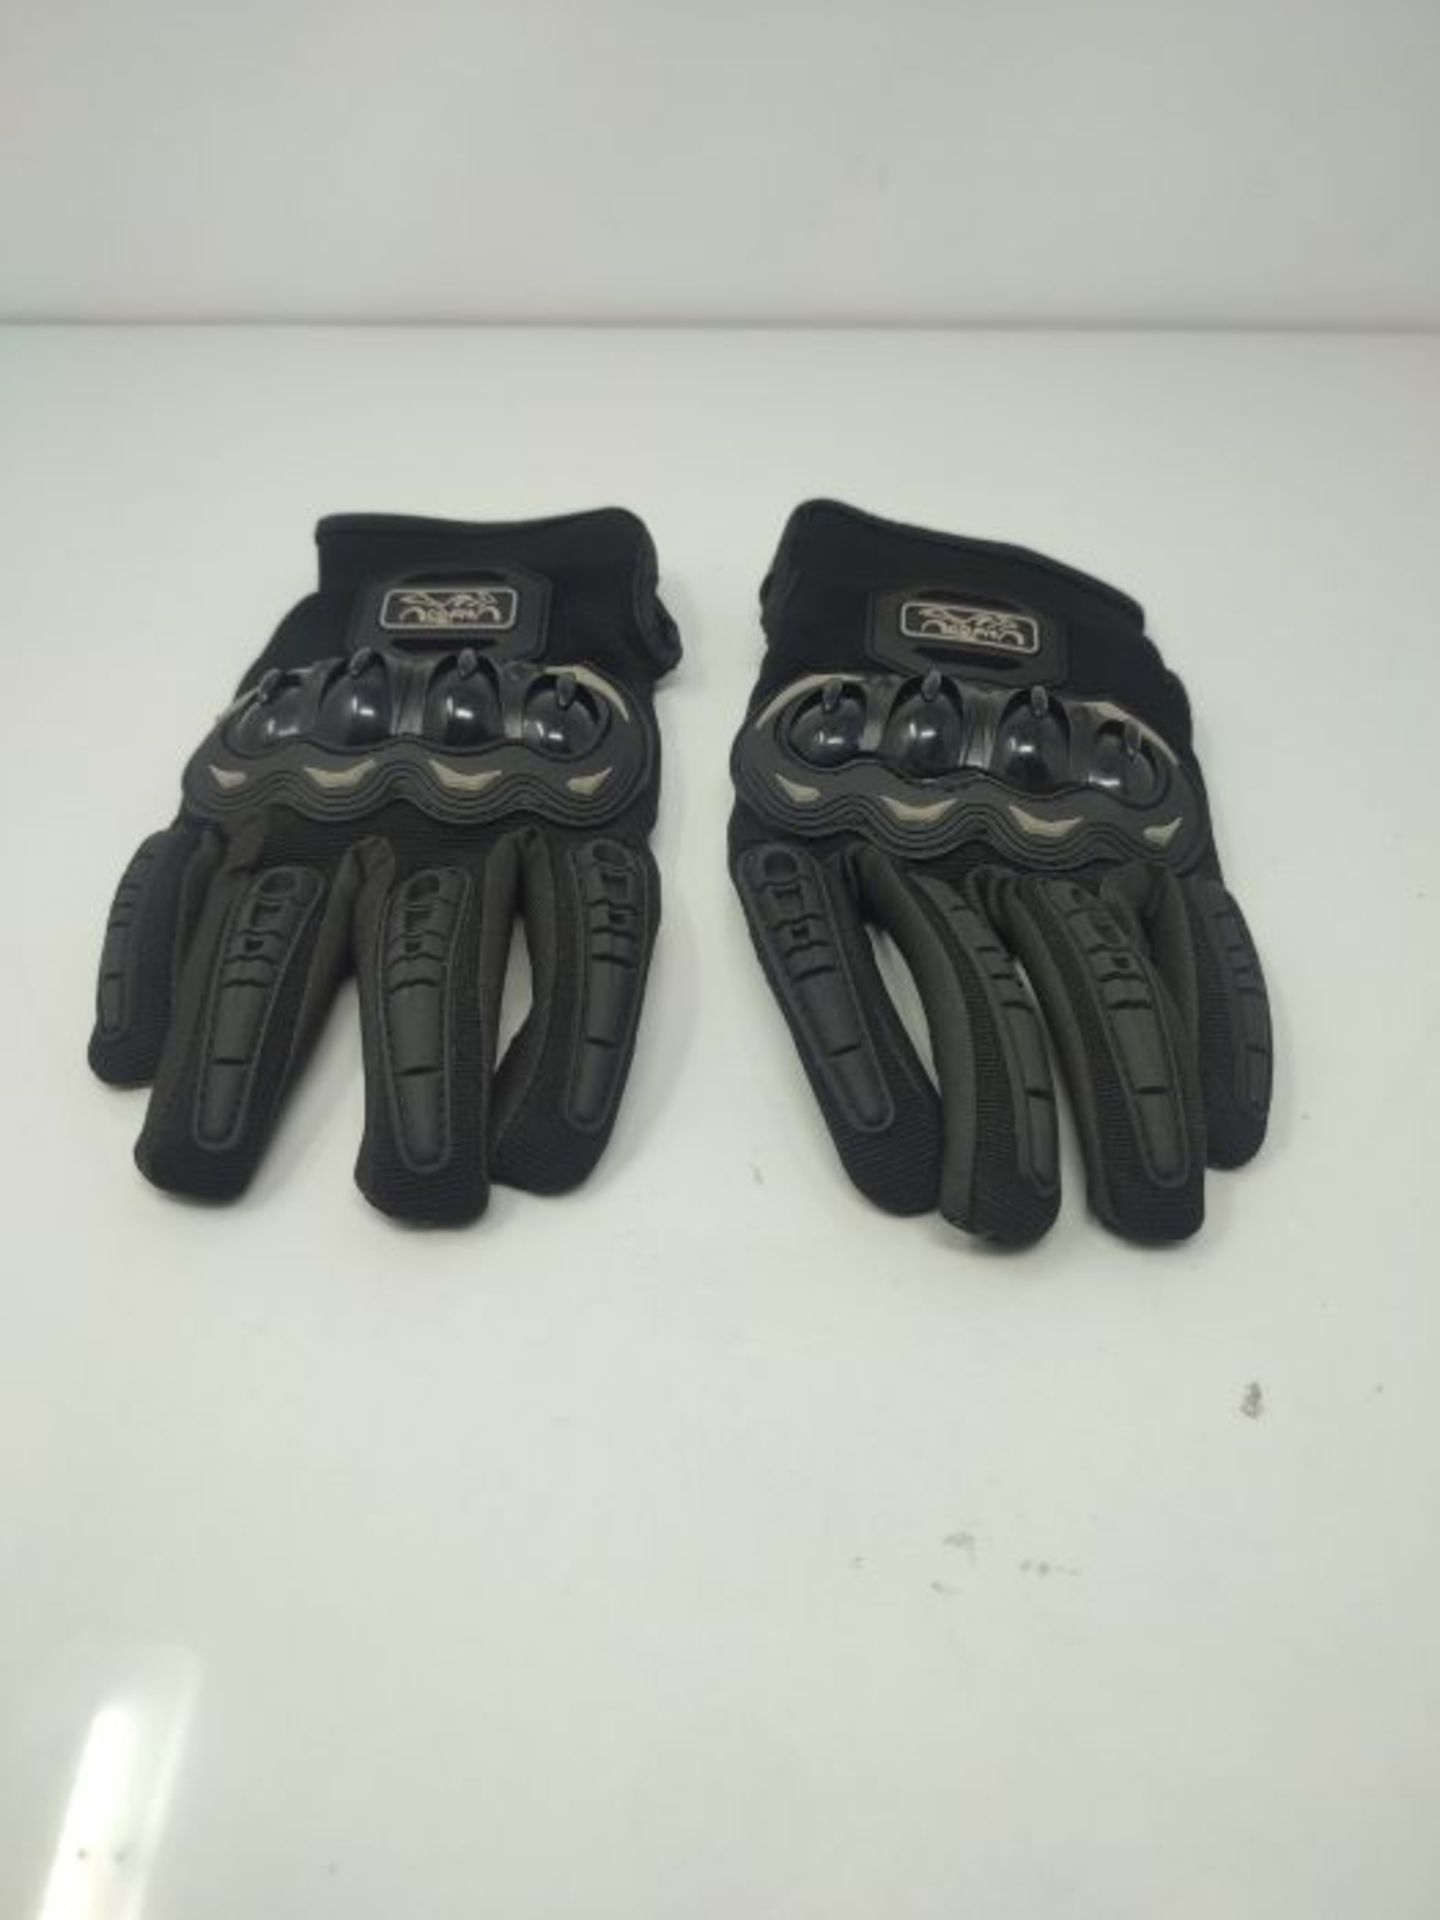 COFIT Motorcycle Gloves, Full Finger Touchscreen Gloves for Motorbike Racing, ATV Ridi - Image 2 of 2